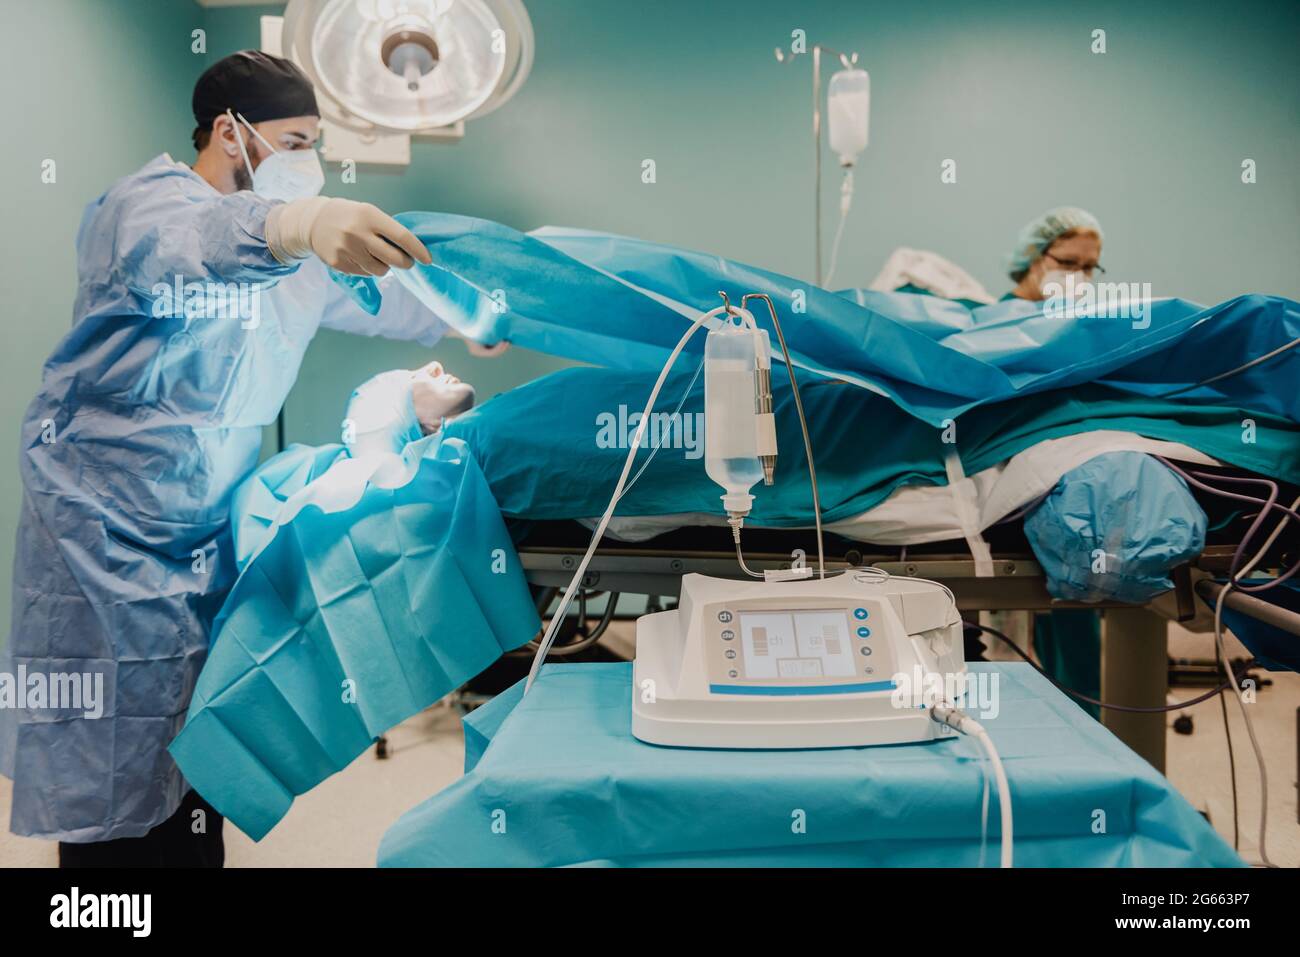 Medical doctors team preparing patient in operating room at hospital - Focus on ultrasonic equipment Stock Photo